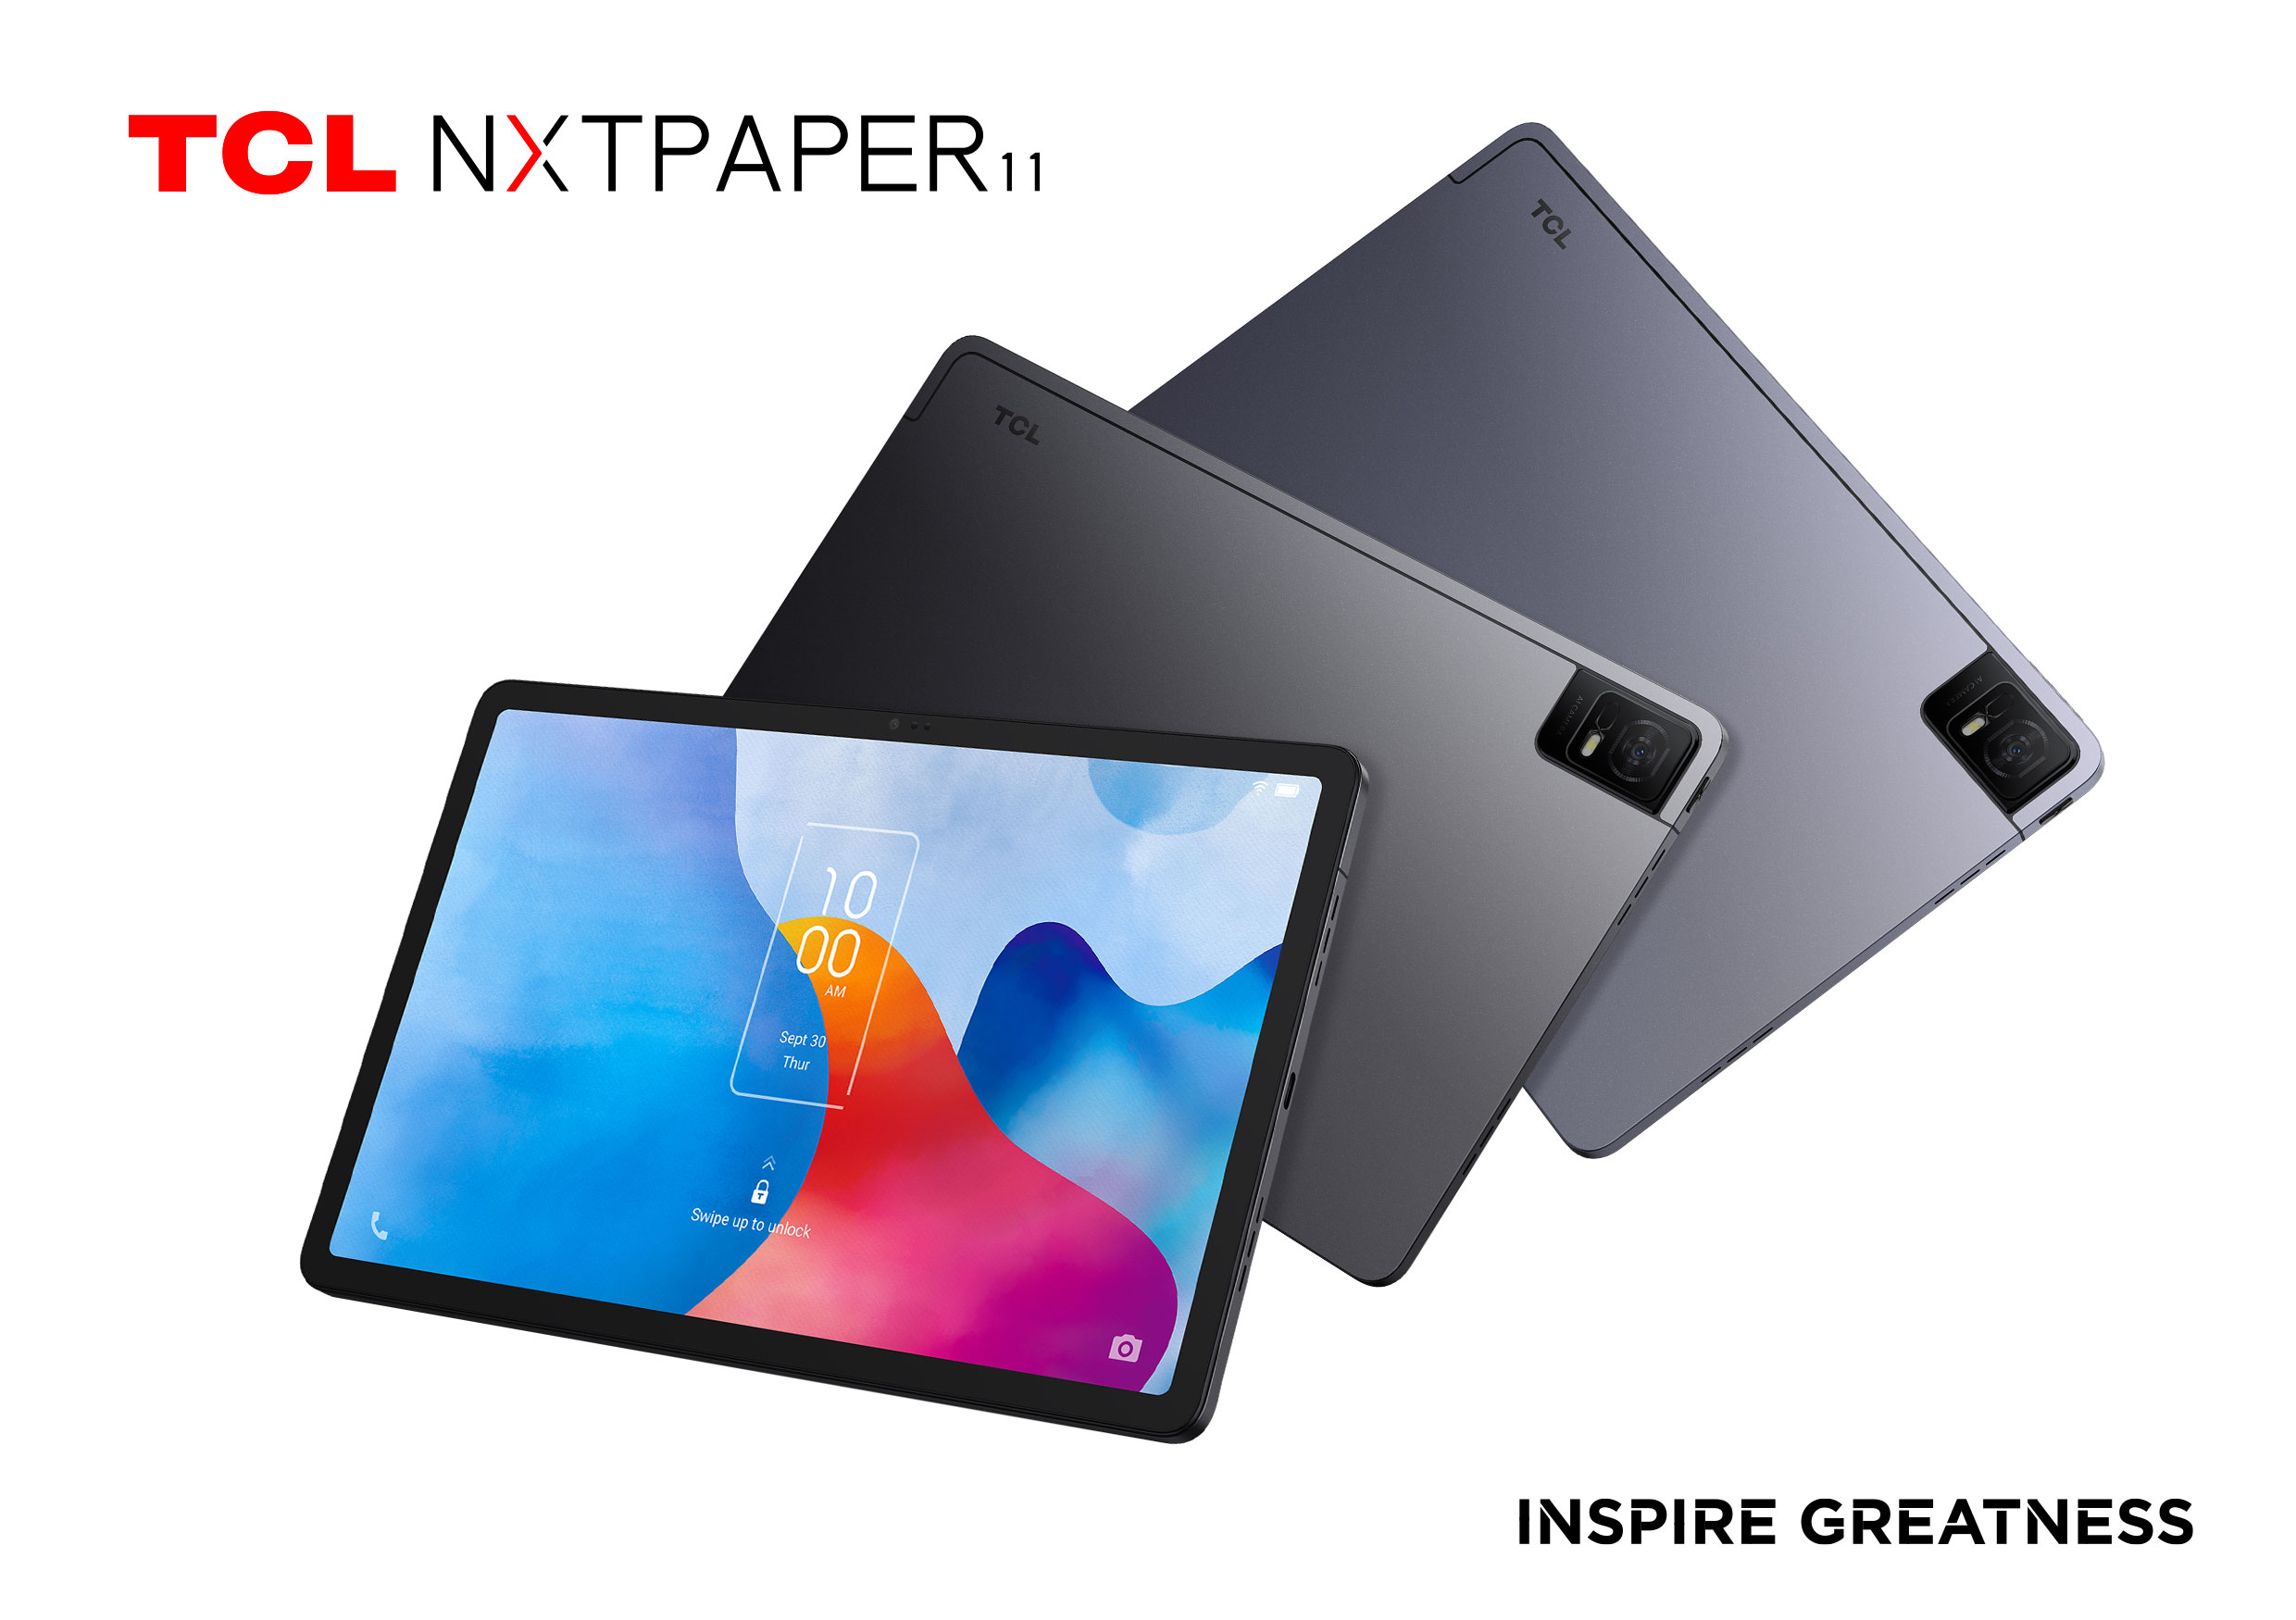 Introducing TCL 40 NXTPAPER: World's First Smartphone With Paper-like  Screen